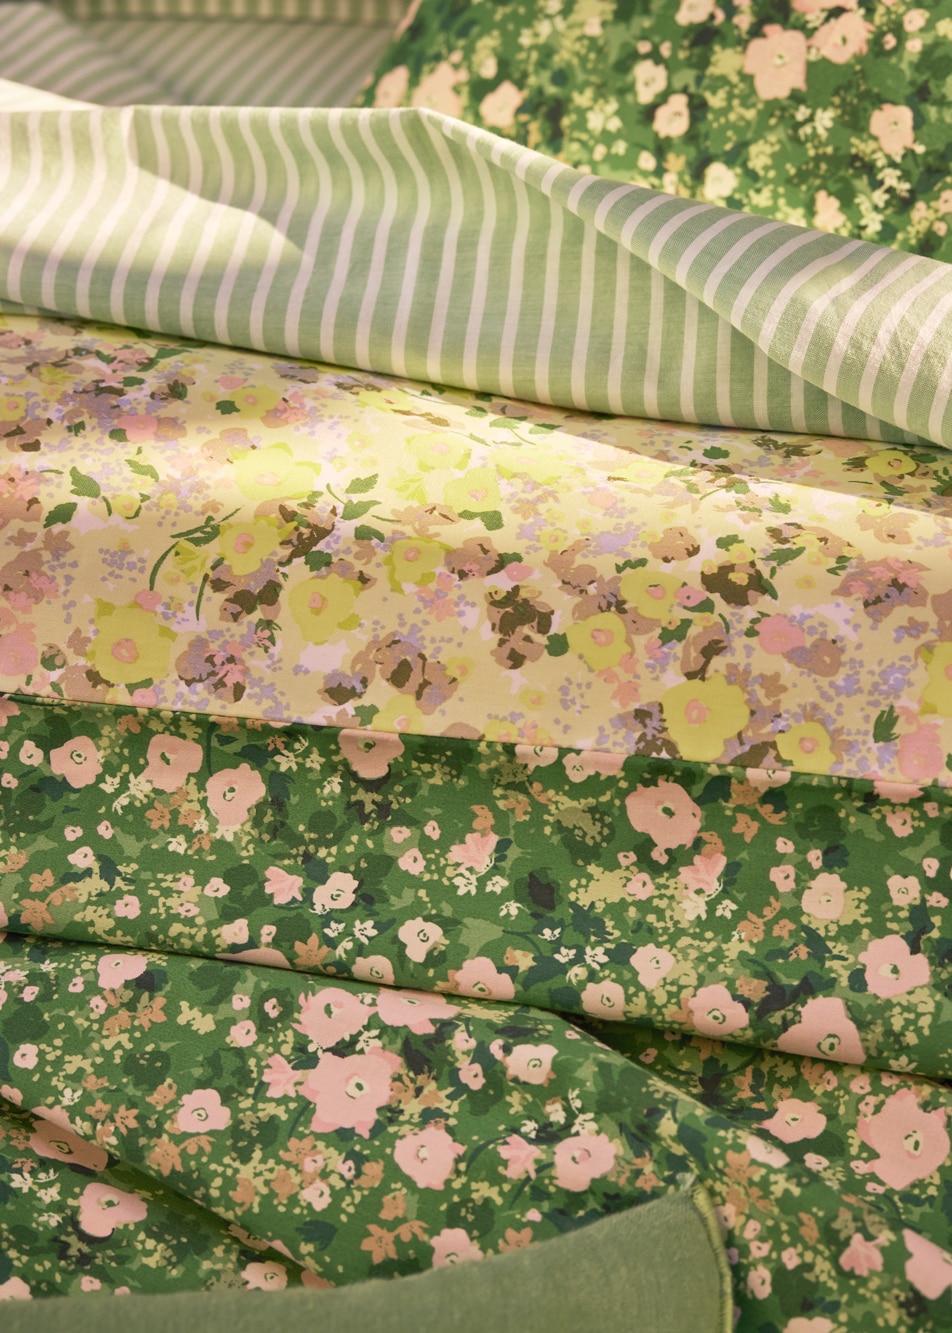 A close up image of layered sheets with floral and stripe prints